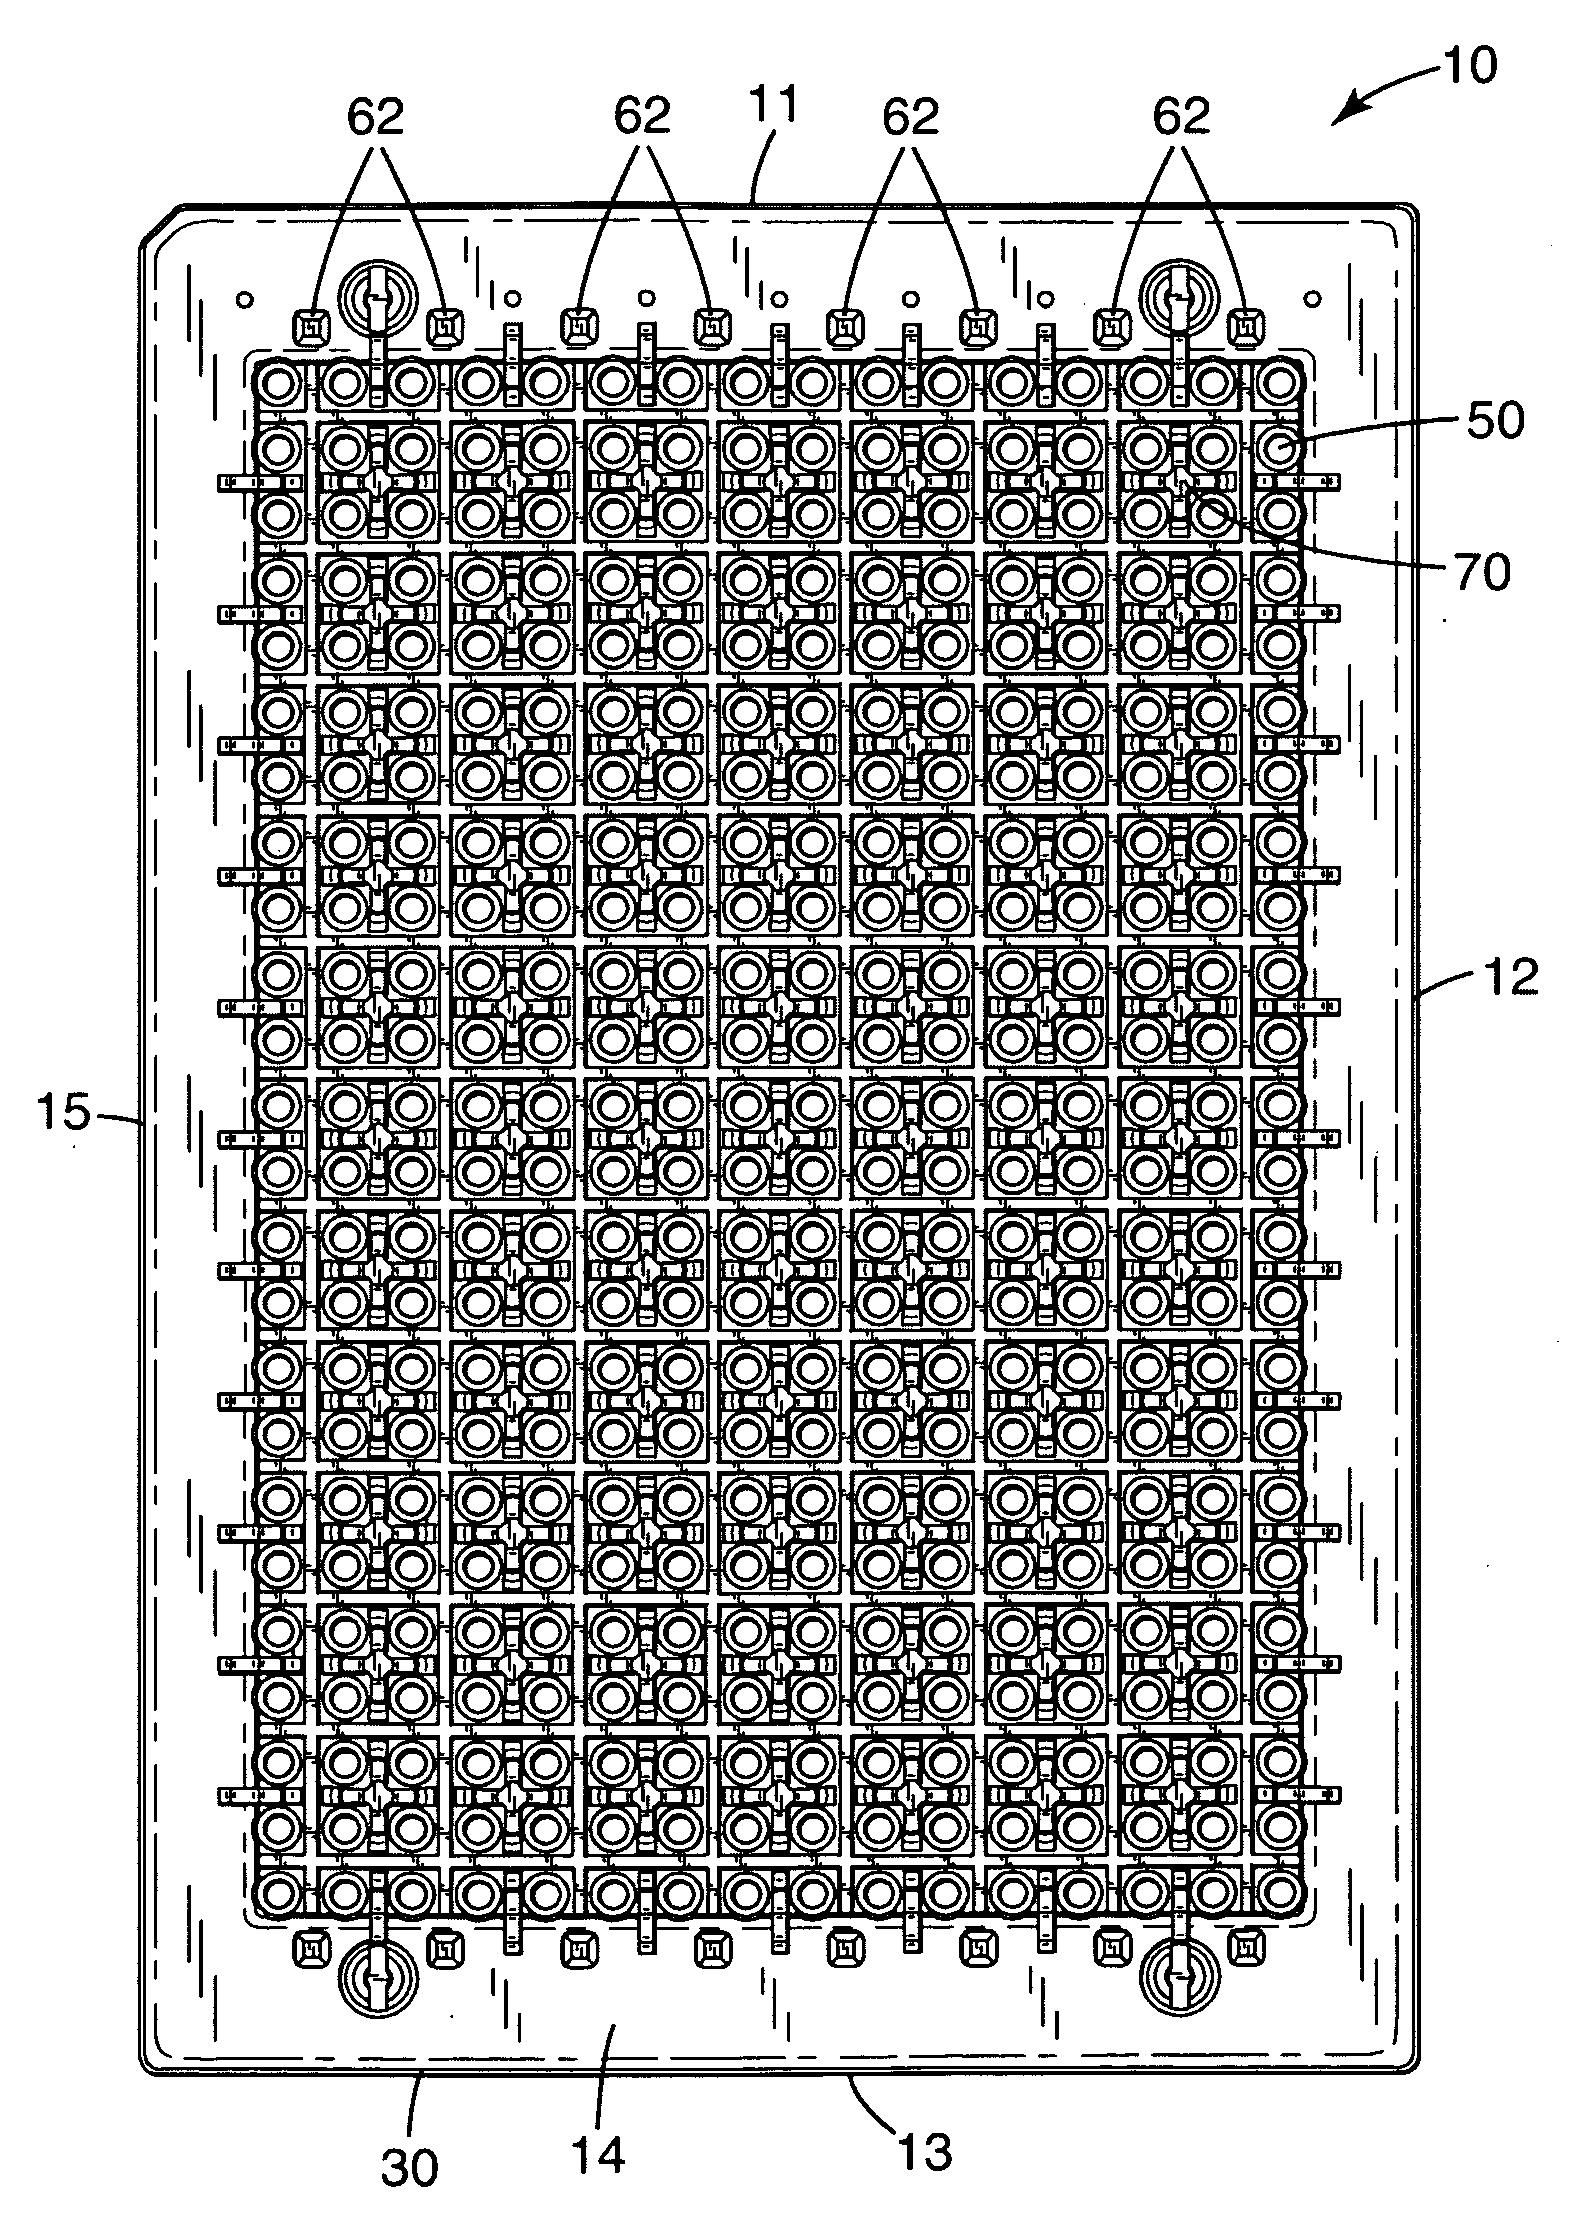 Integrated sample processing devices